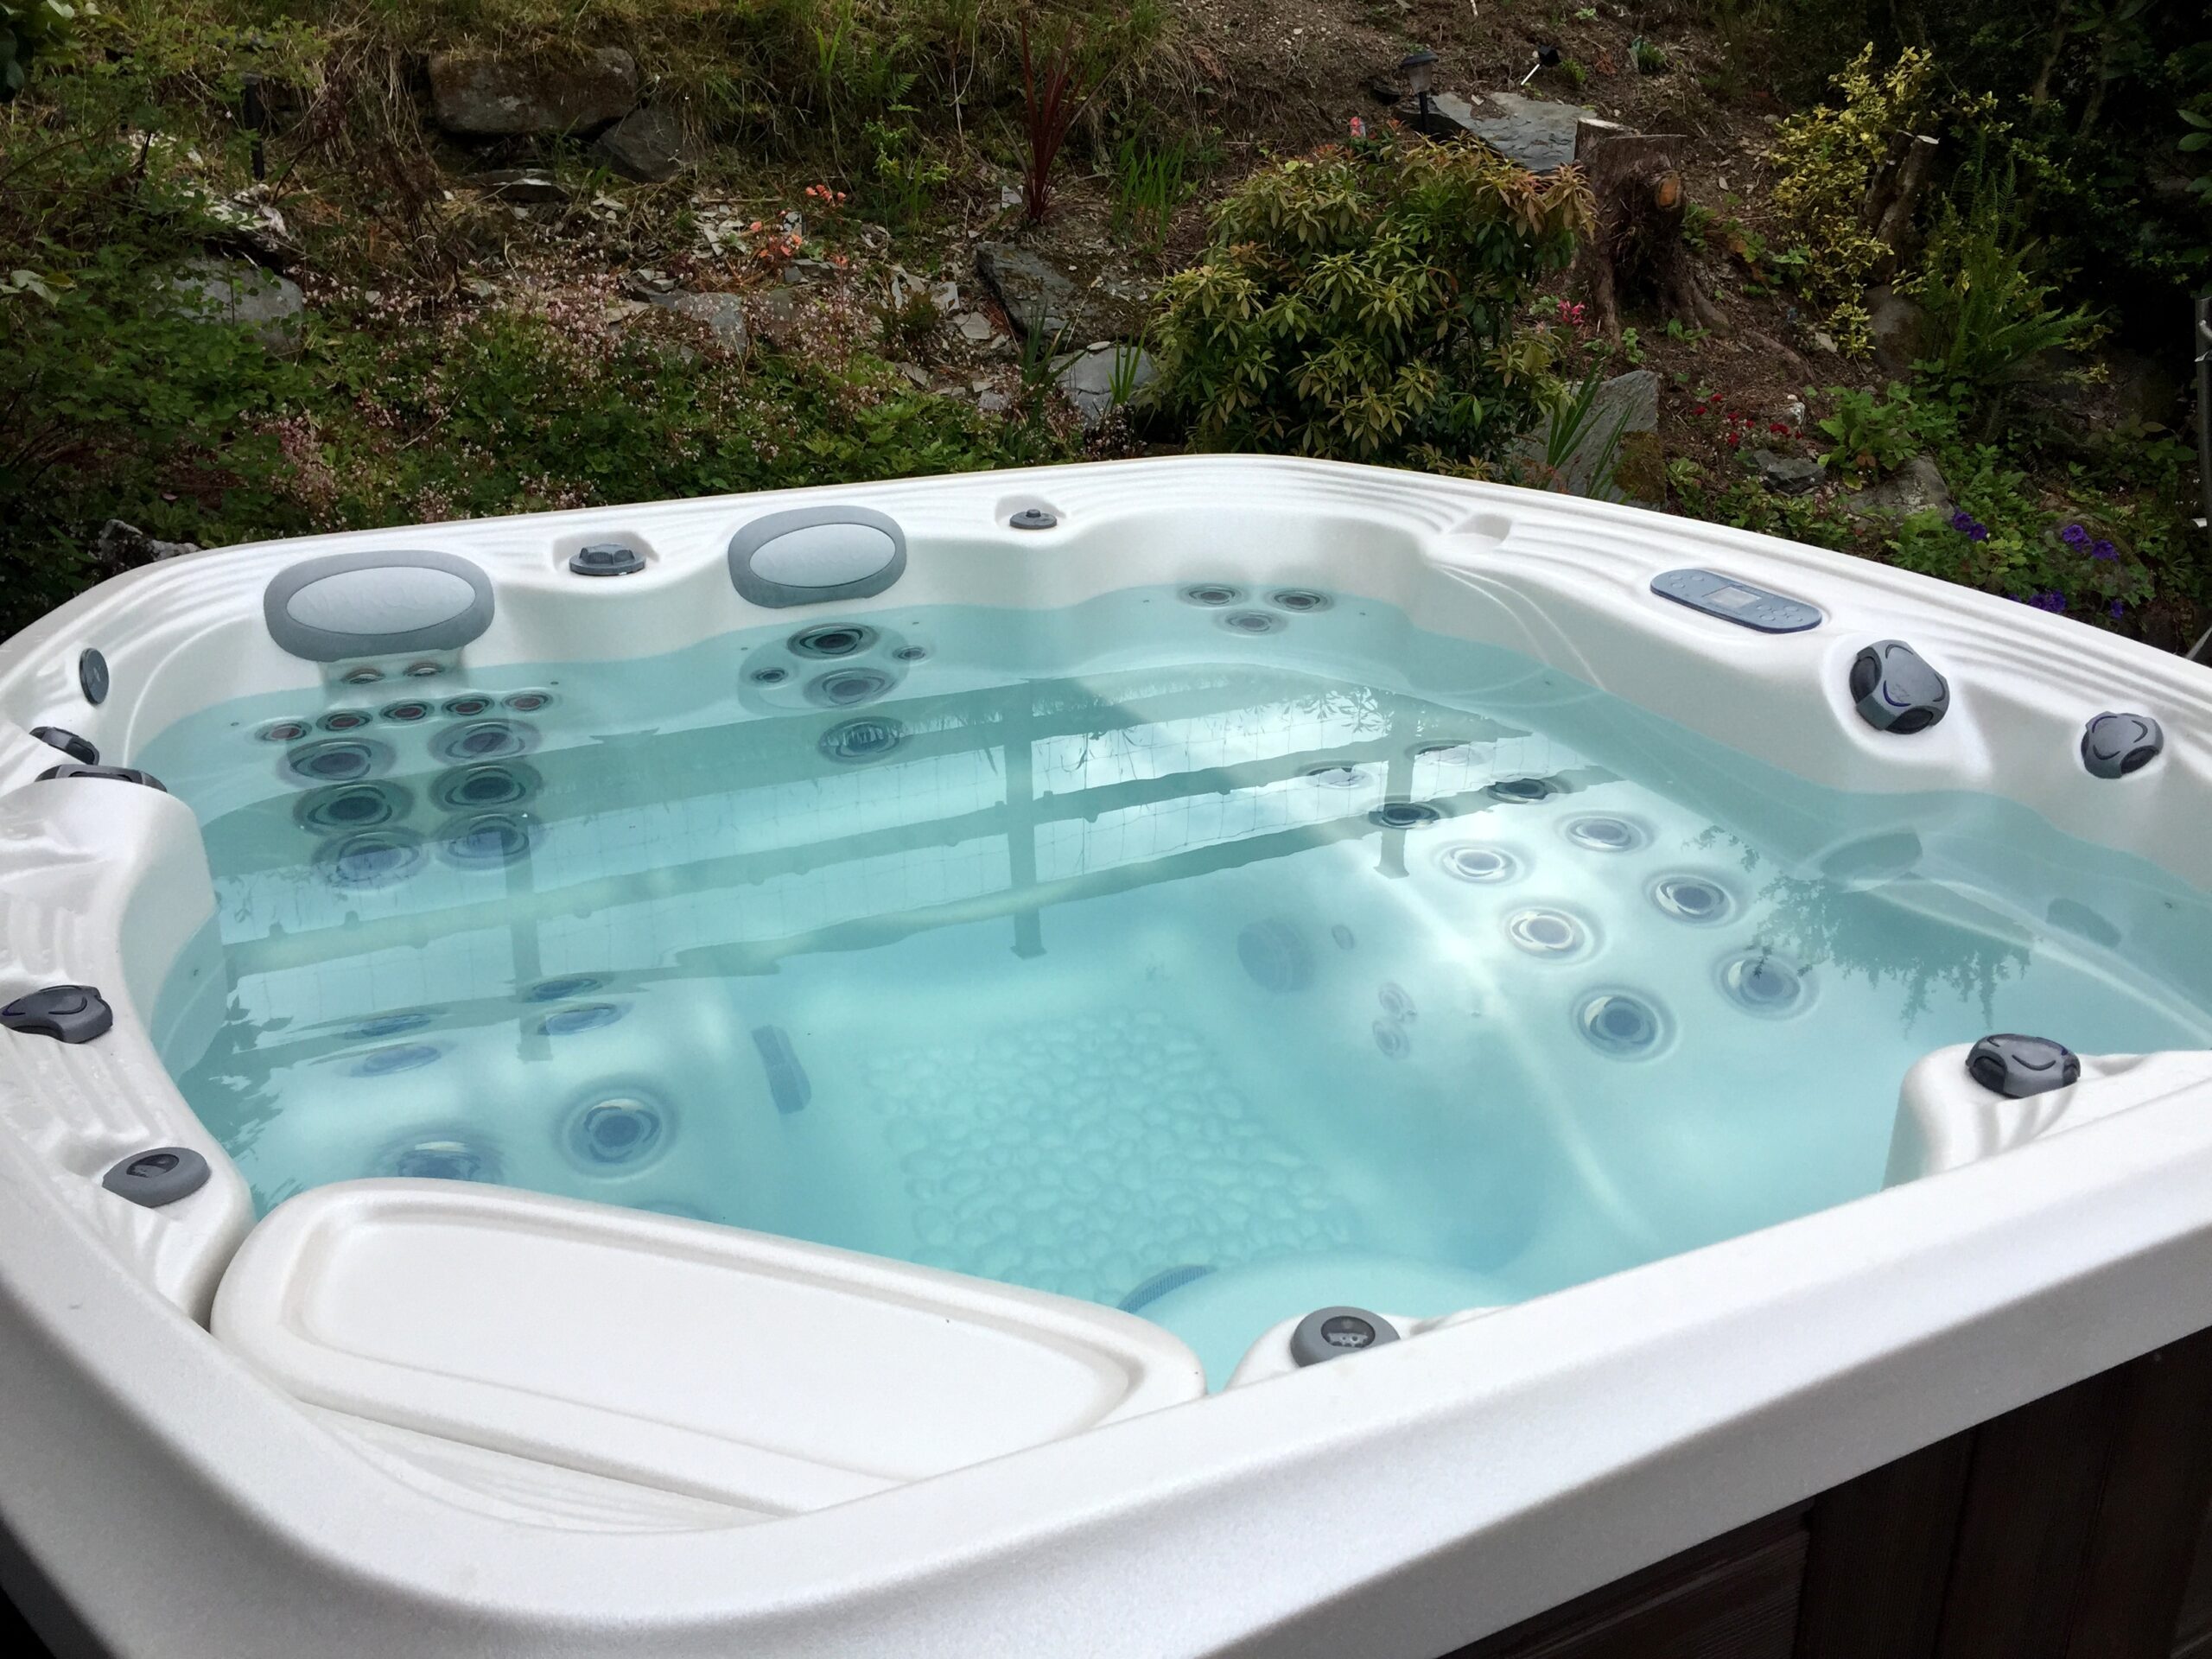 Marquis Spas Crown Resort Hot Tub close up with jets off